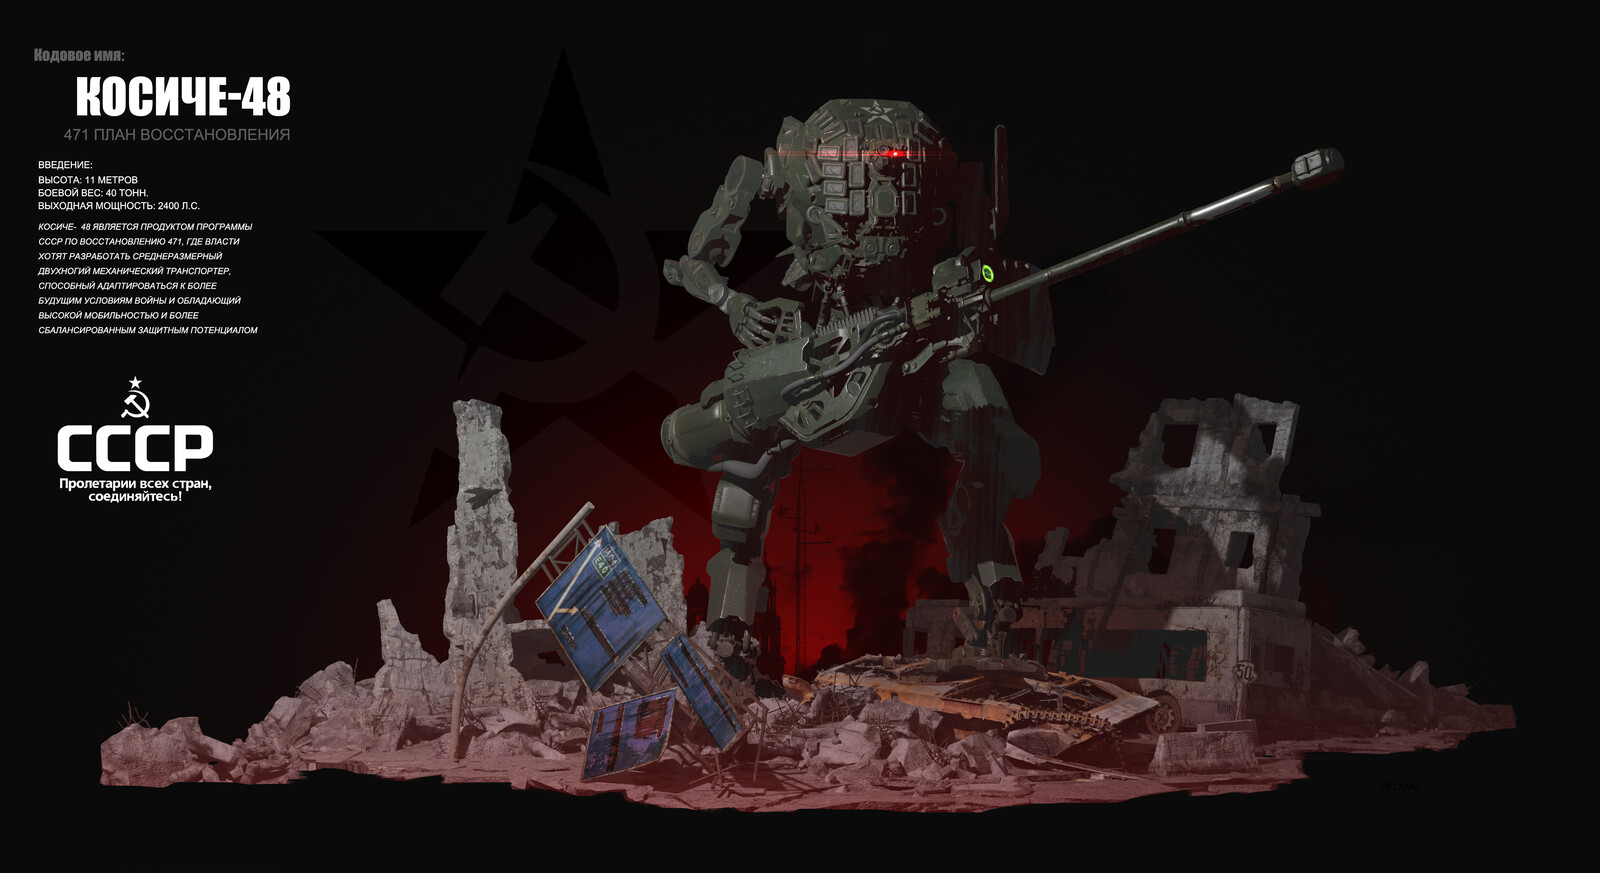 ussr style mech with a giant gun, walking over destroyed buildings. there is a summary to the left in [russian? possibly bulgarian?]